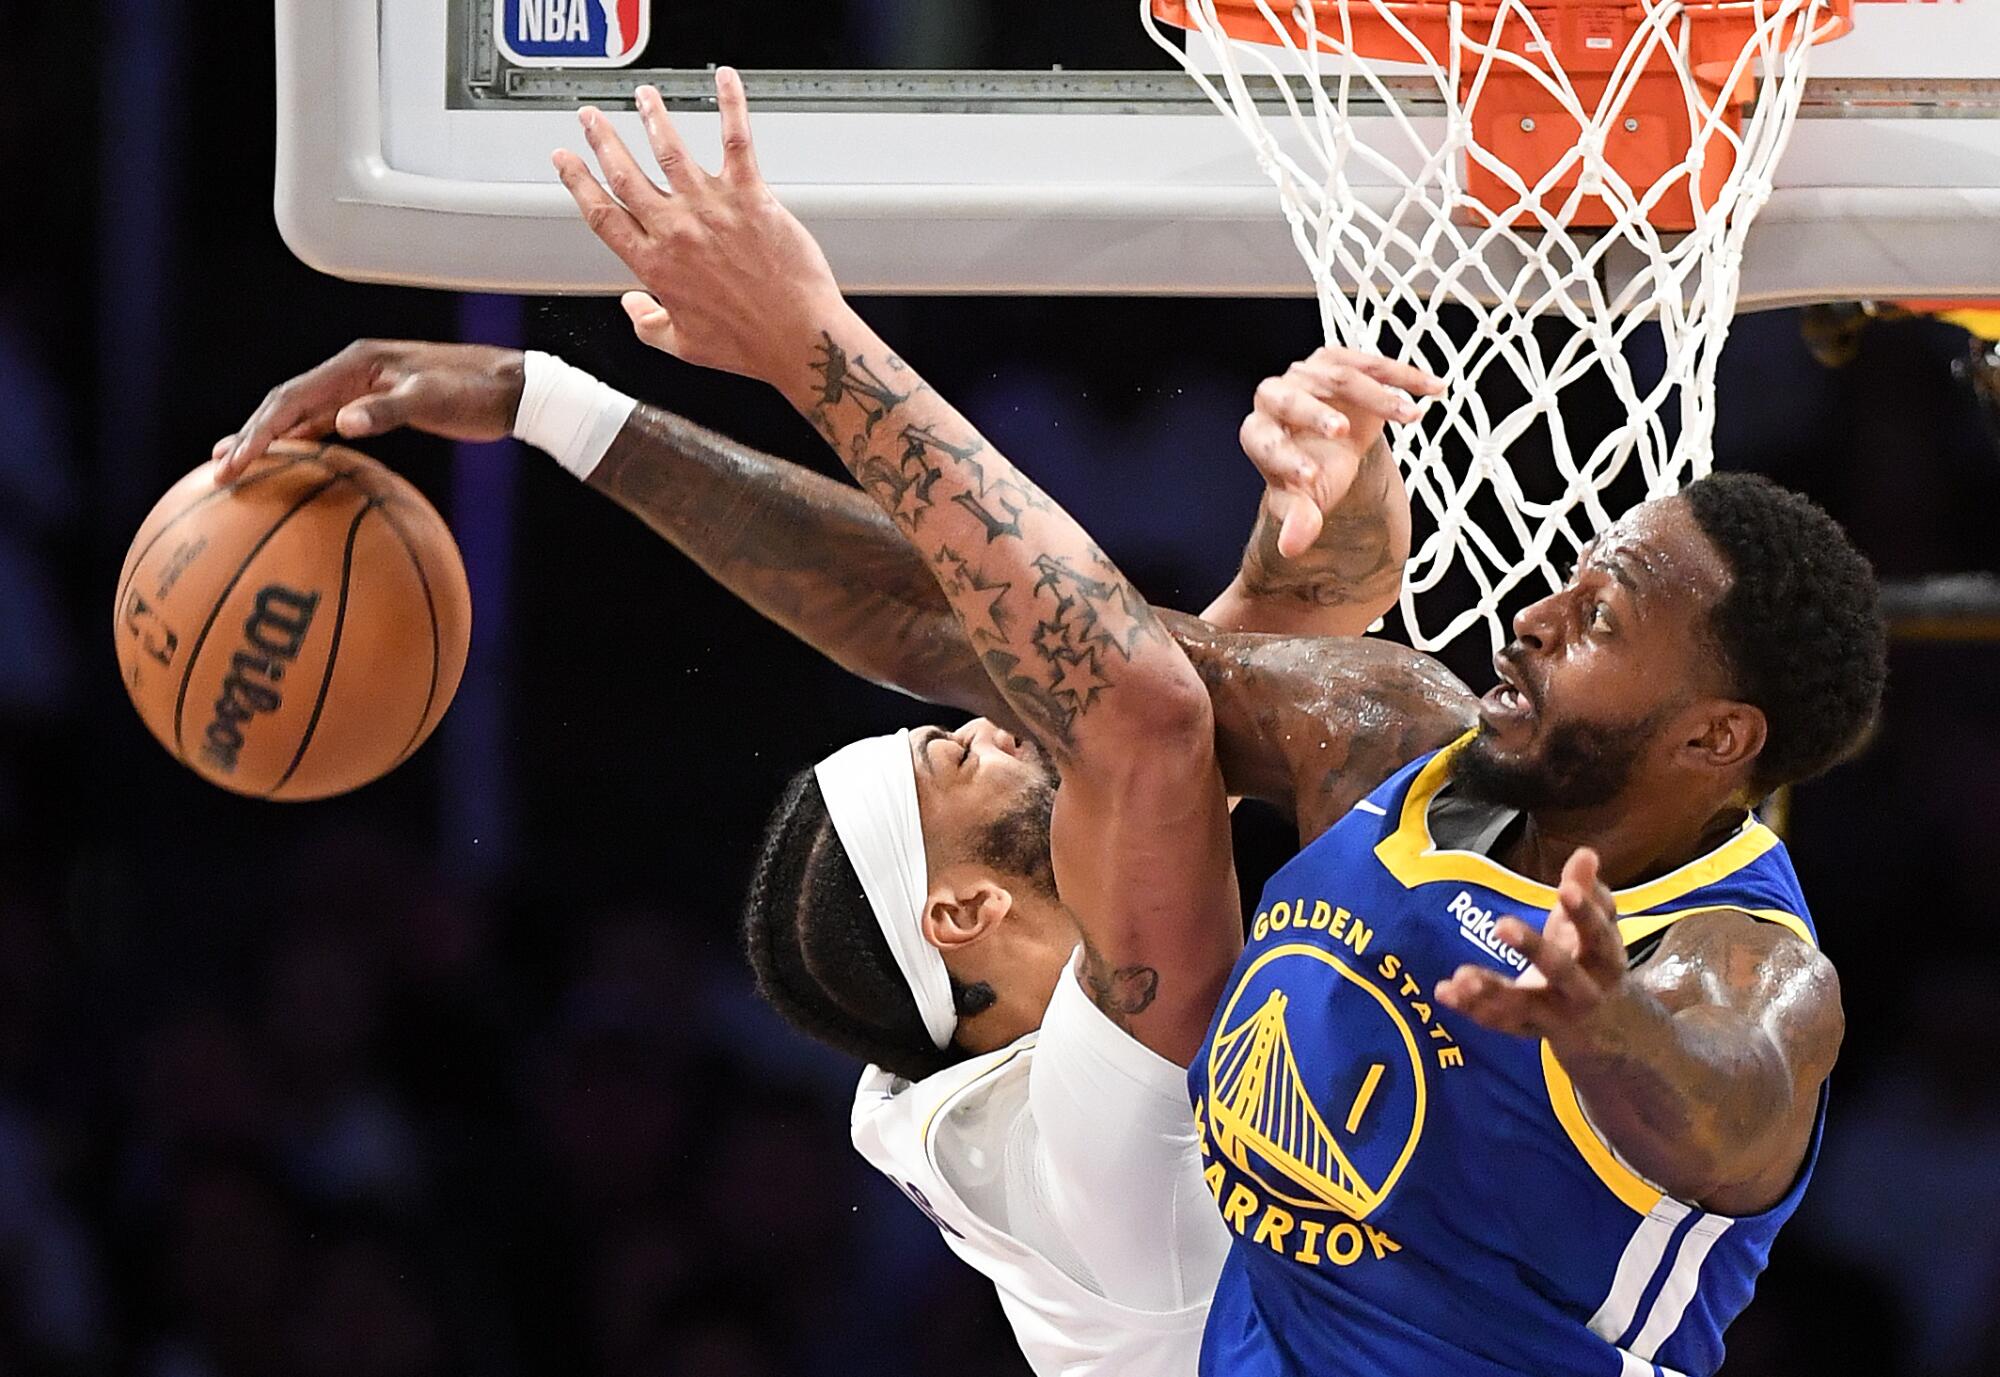 Anthony Davis is fouled hard by the Warriors' JaMychal Green in the first quarter.